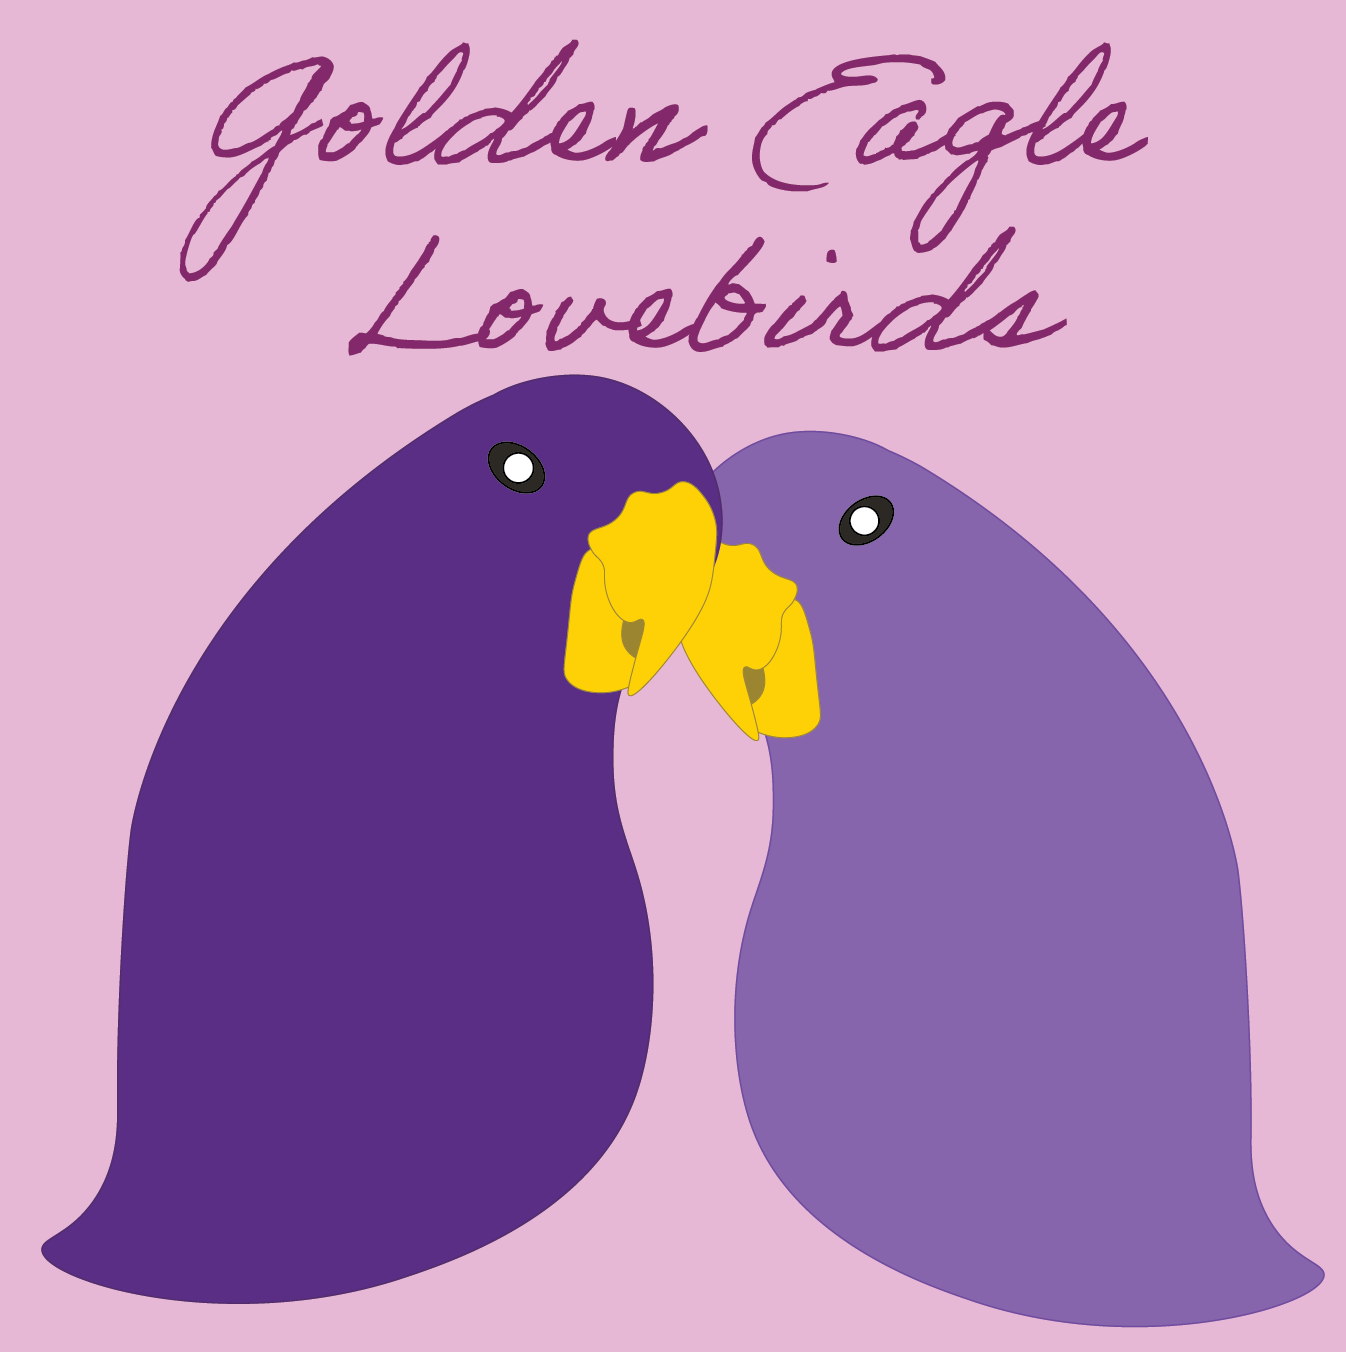 Two puple lovebirds have their heads together - Golden Eagle Lovebirds